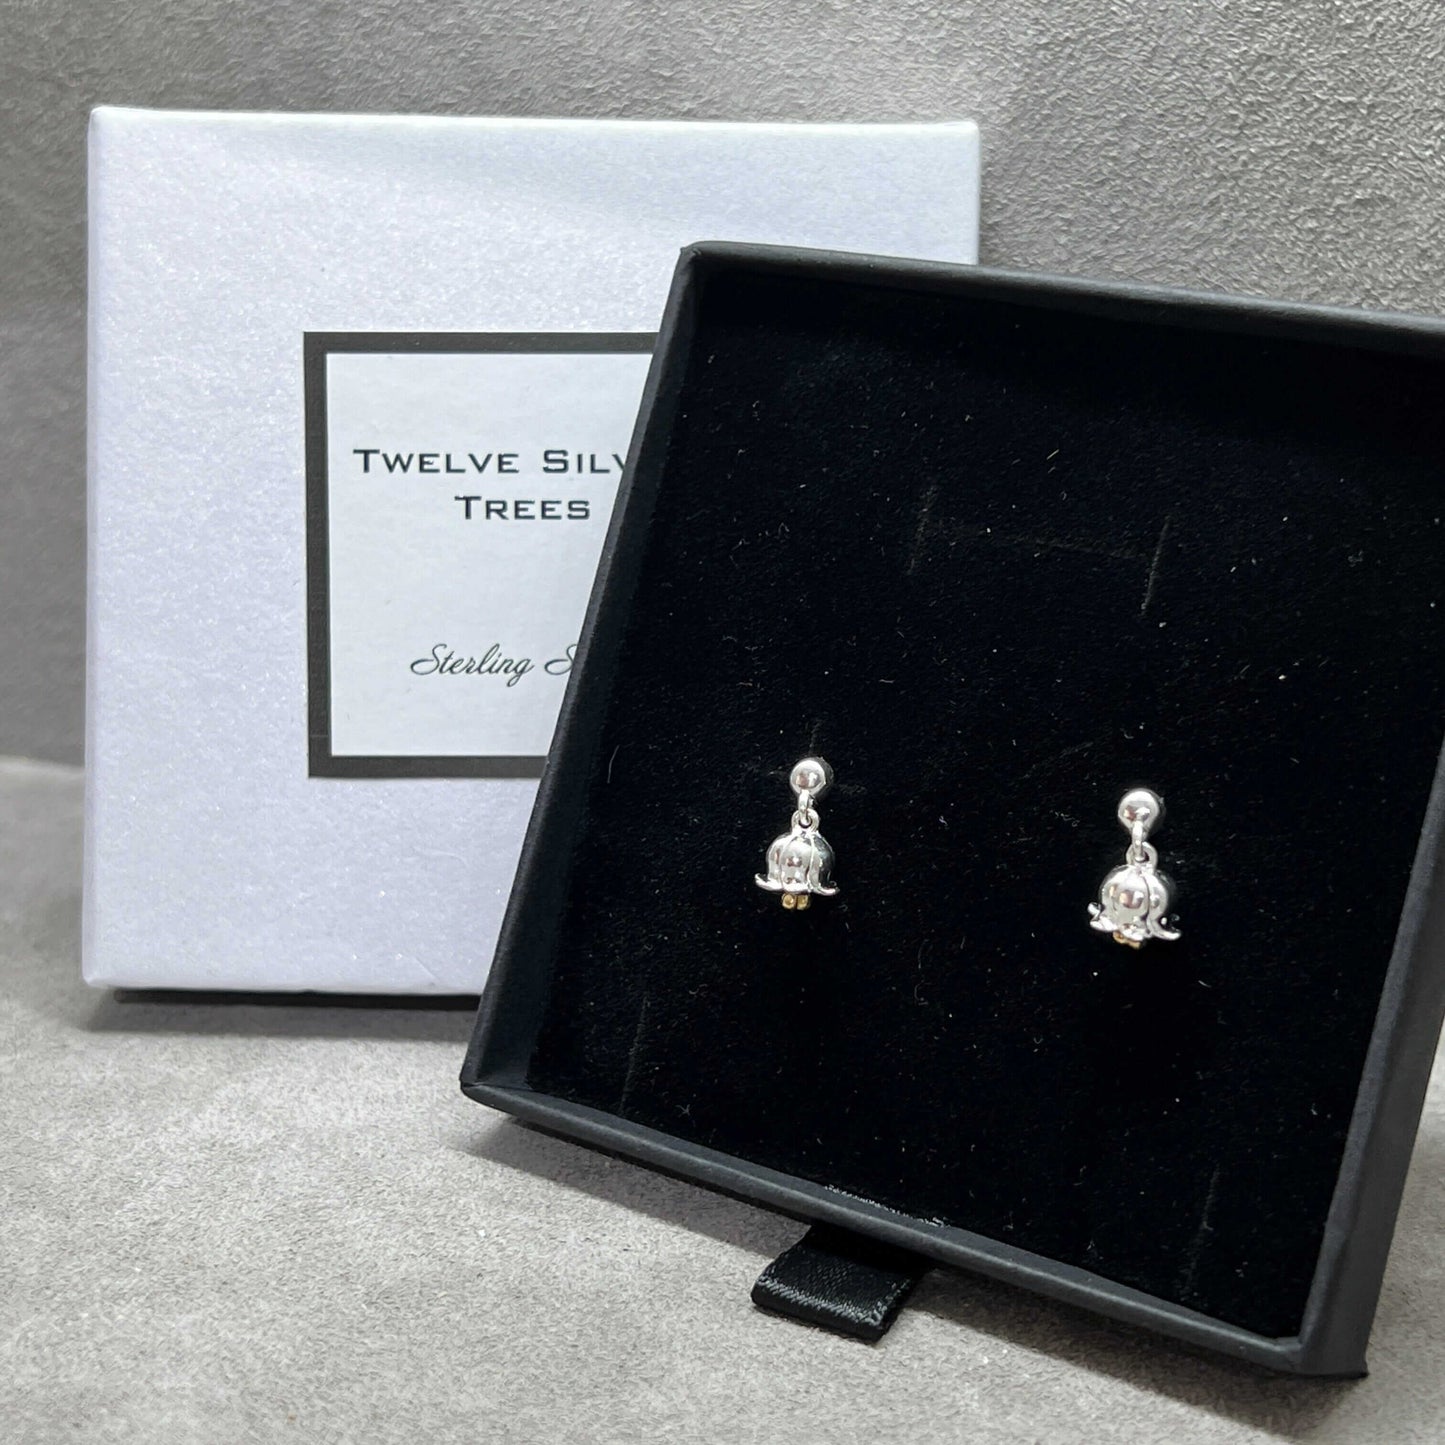 2 Tone Lily Of The Valley Stud Earrings in Sterling Silver & 18 Carat Gold - May Birth Flower - Twelve Silver Trees